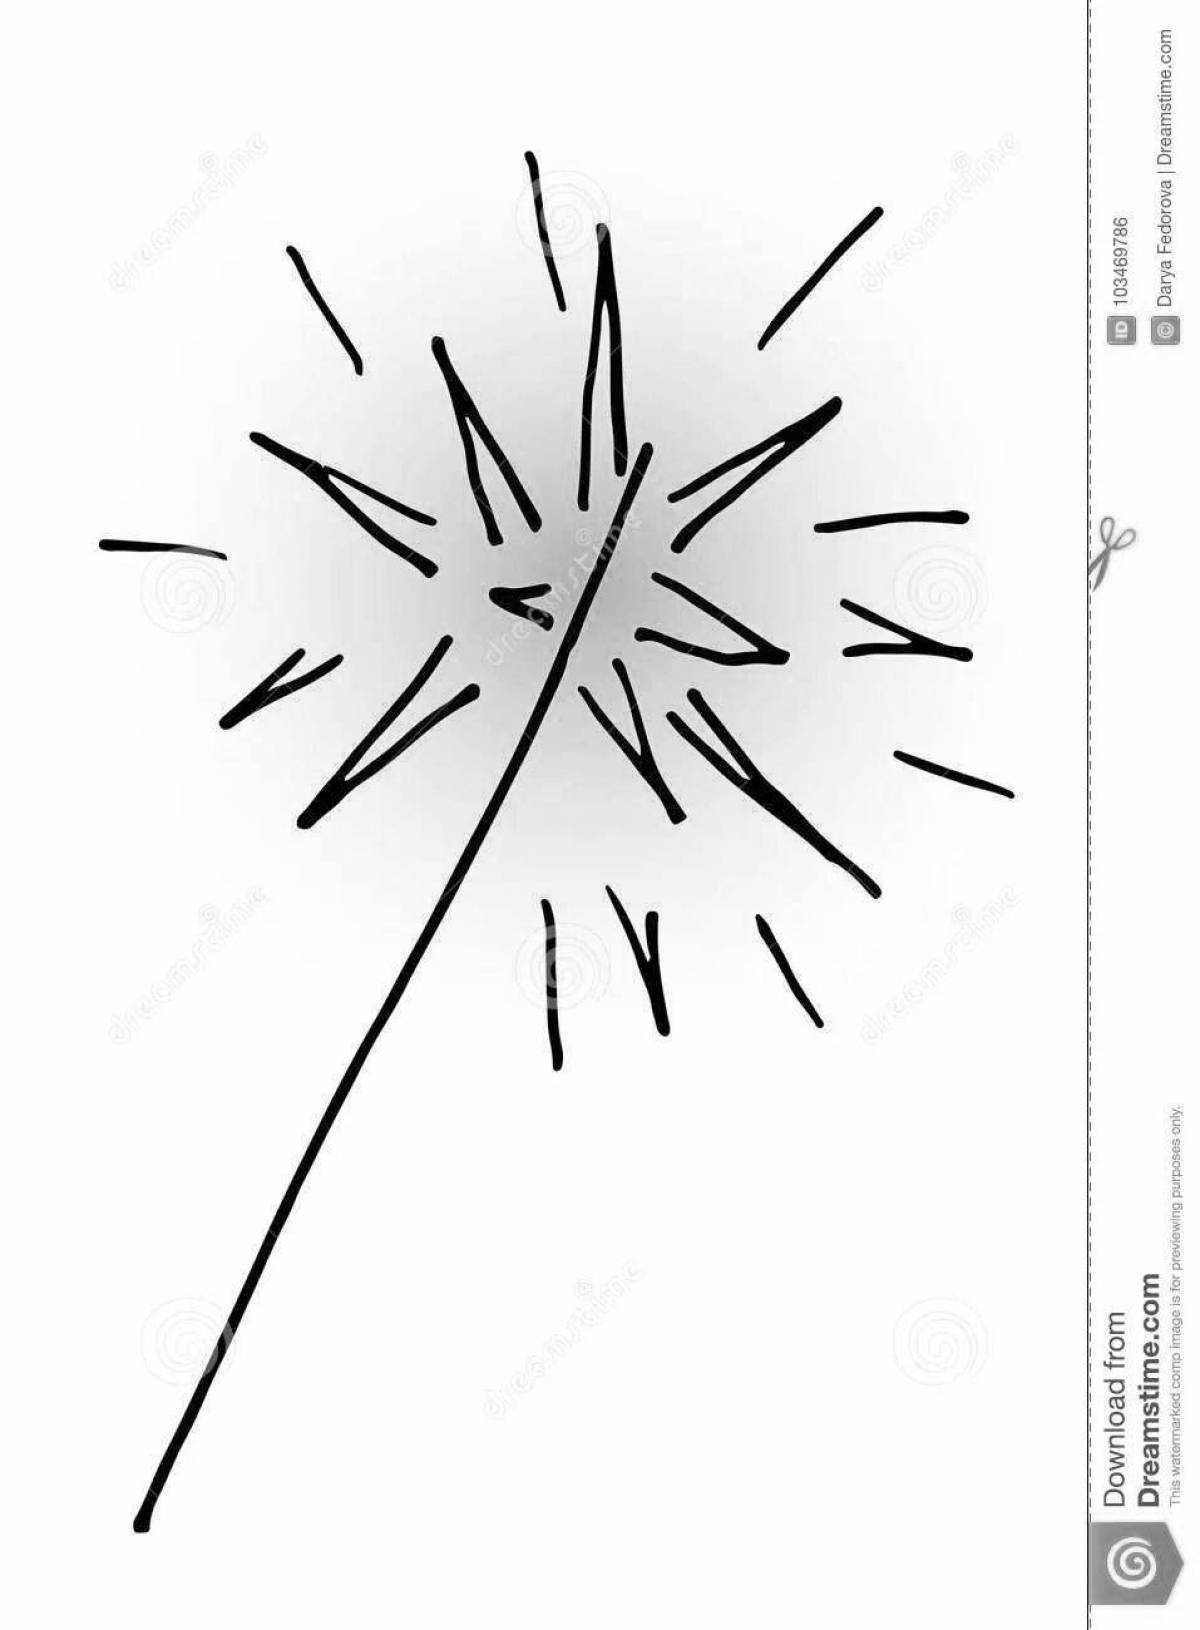 Coloring page joyful bow sparklers